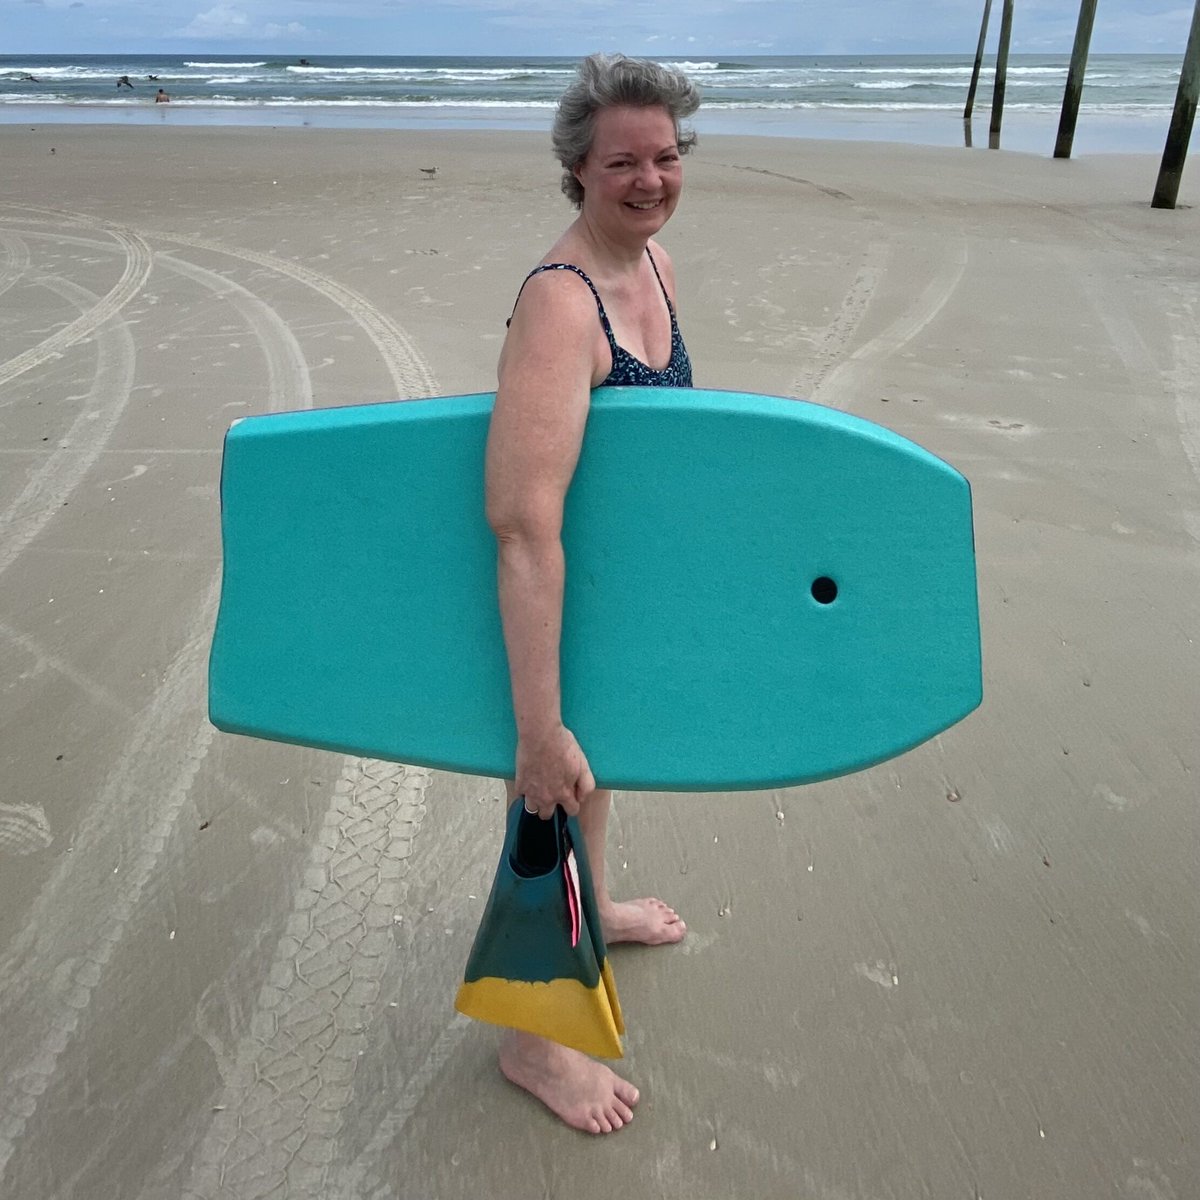 Boogie board day in the surf! Had a great time!
#floridawriters